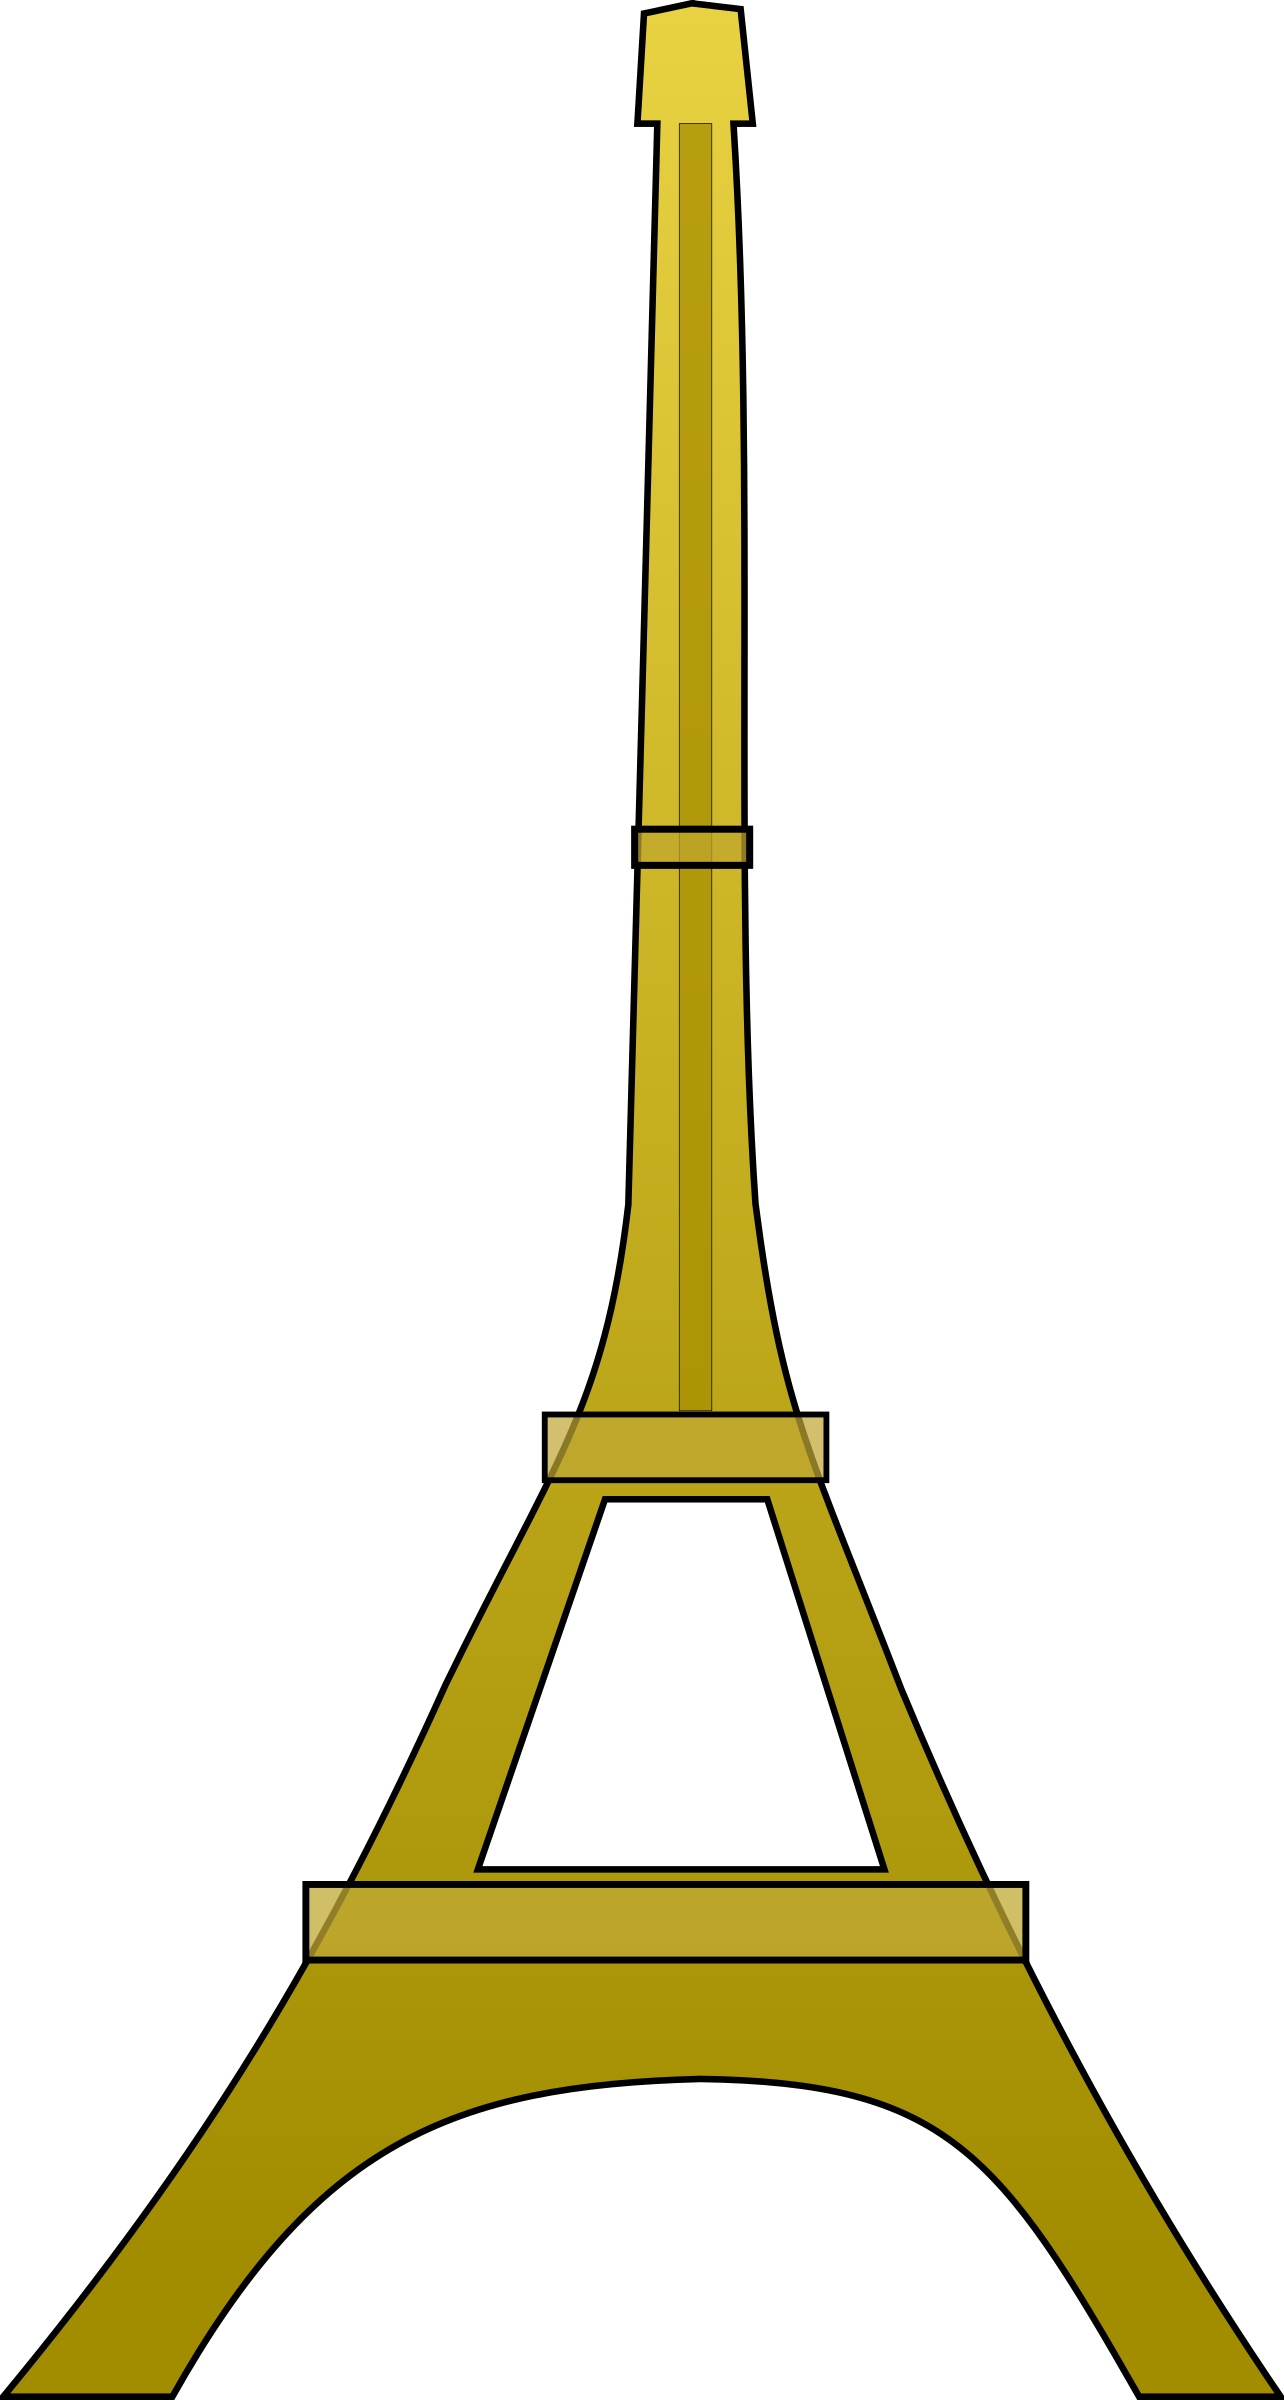 tower clipart gold